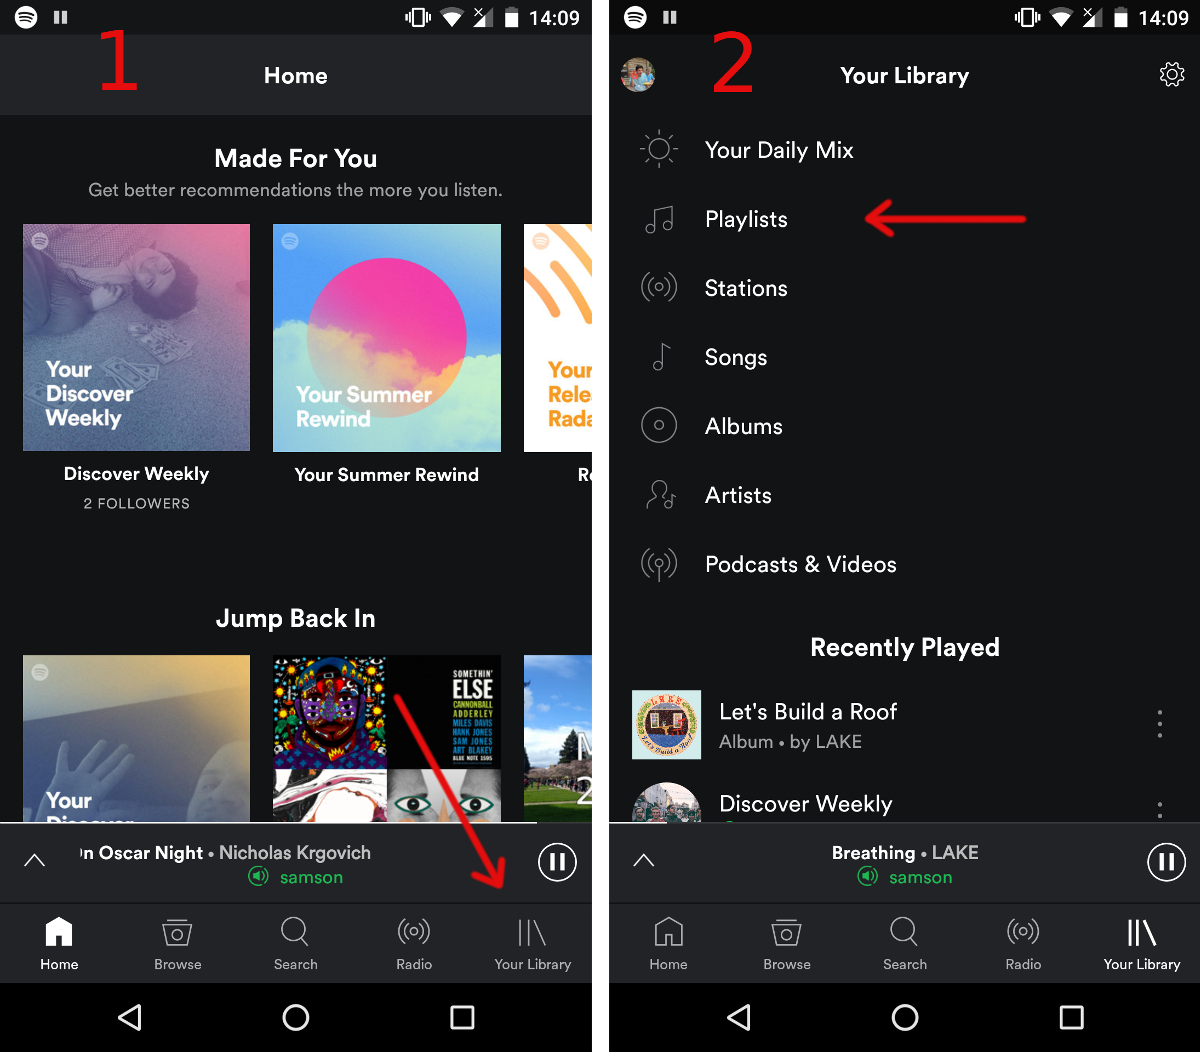 Spotify phone app first view